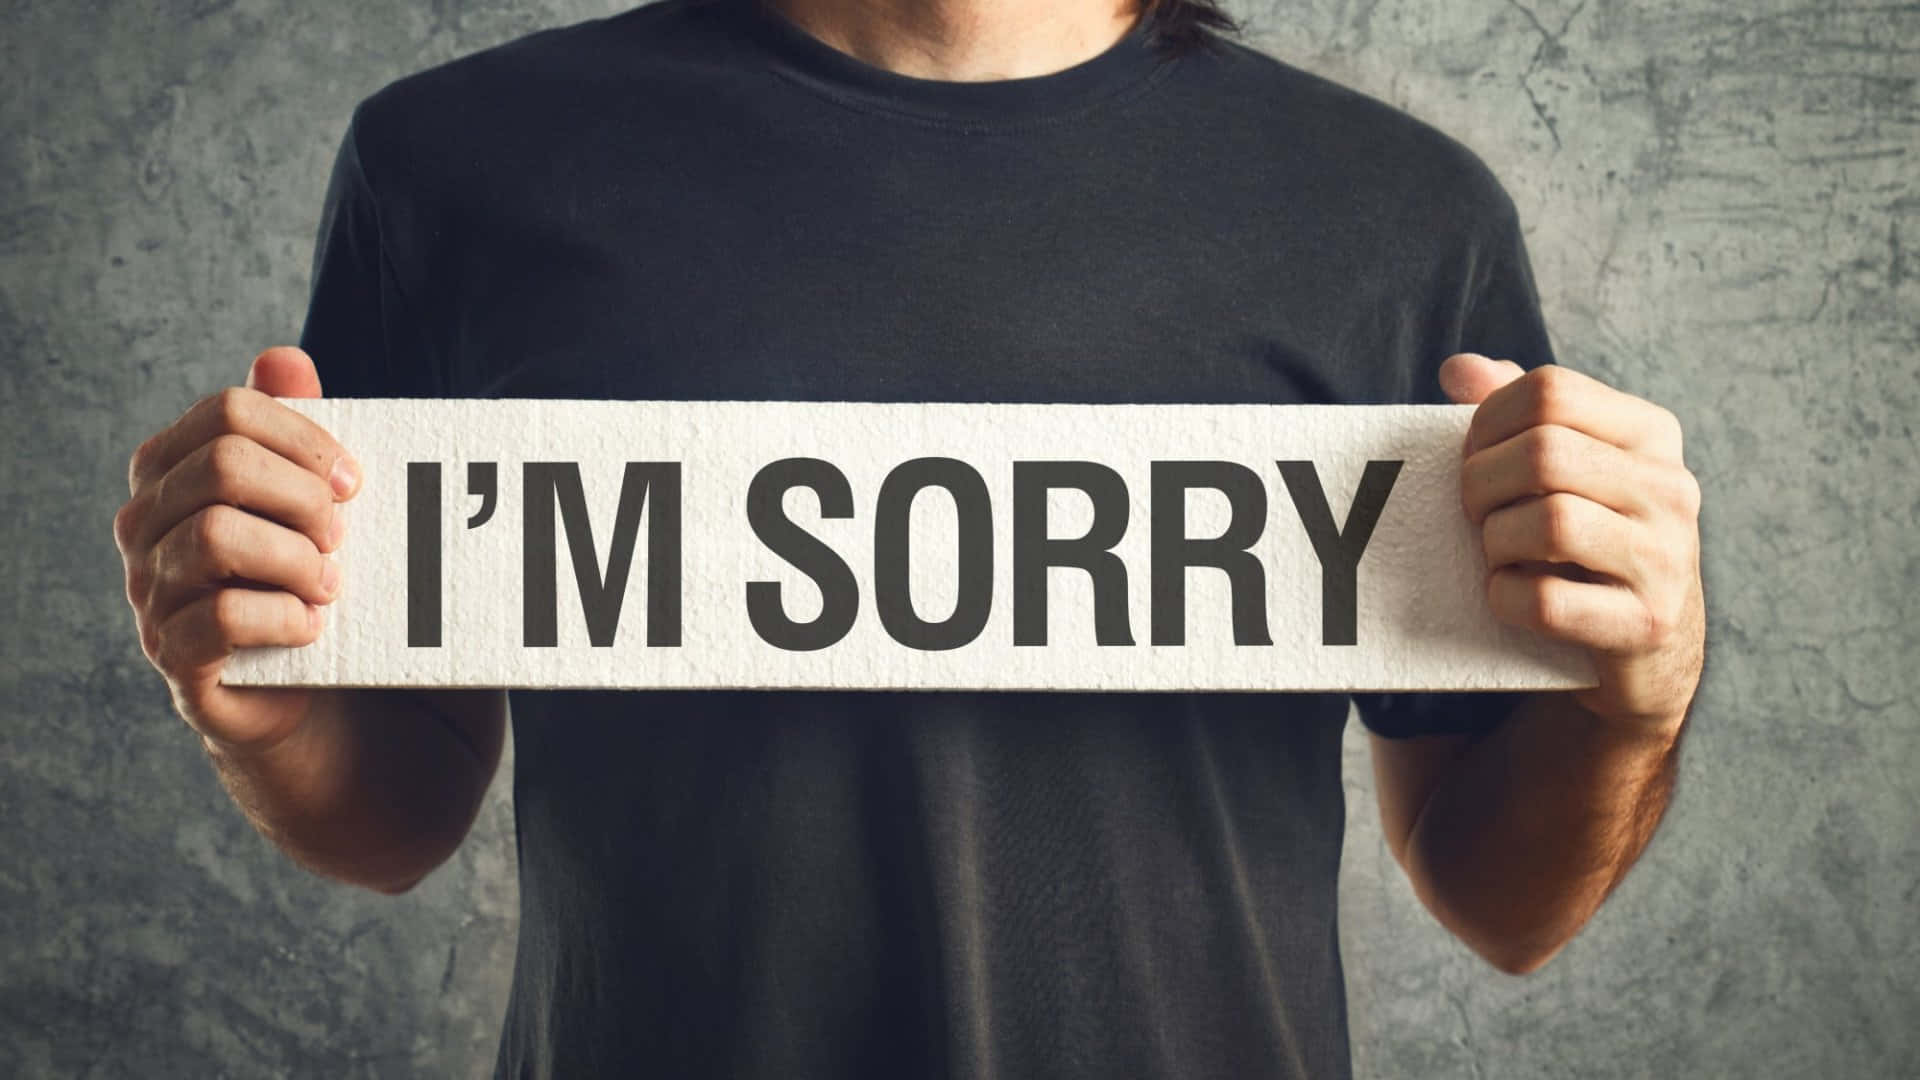 A Meaningful Apology